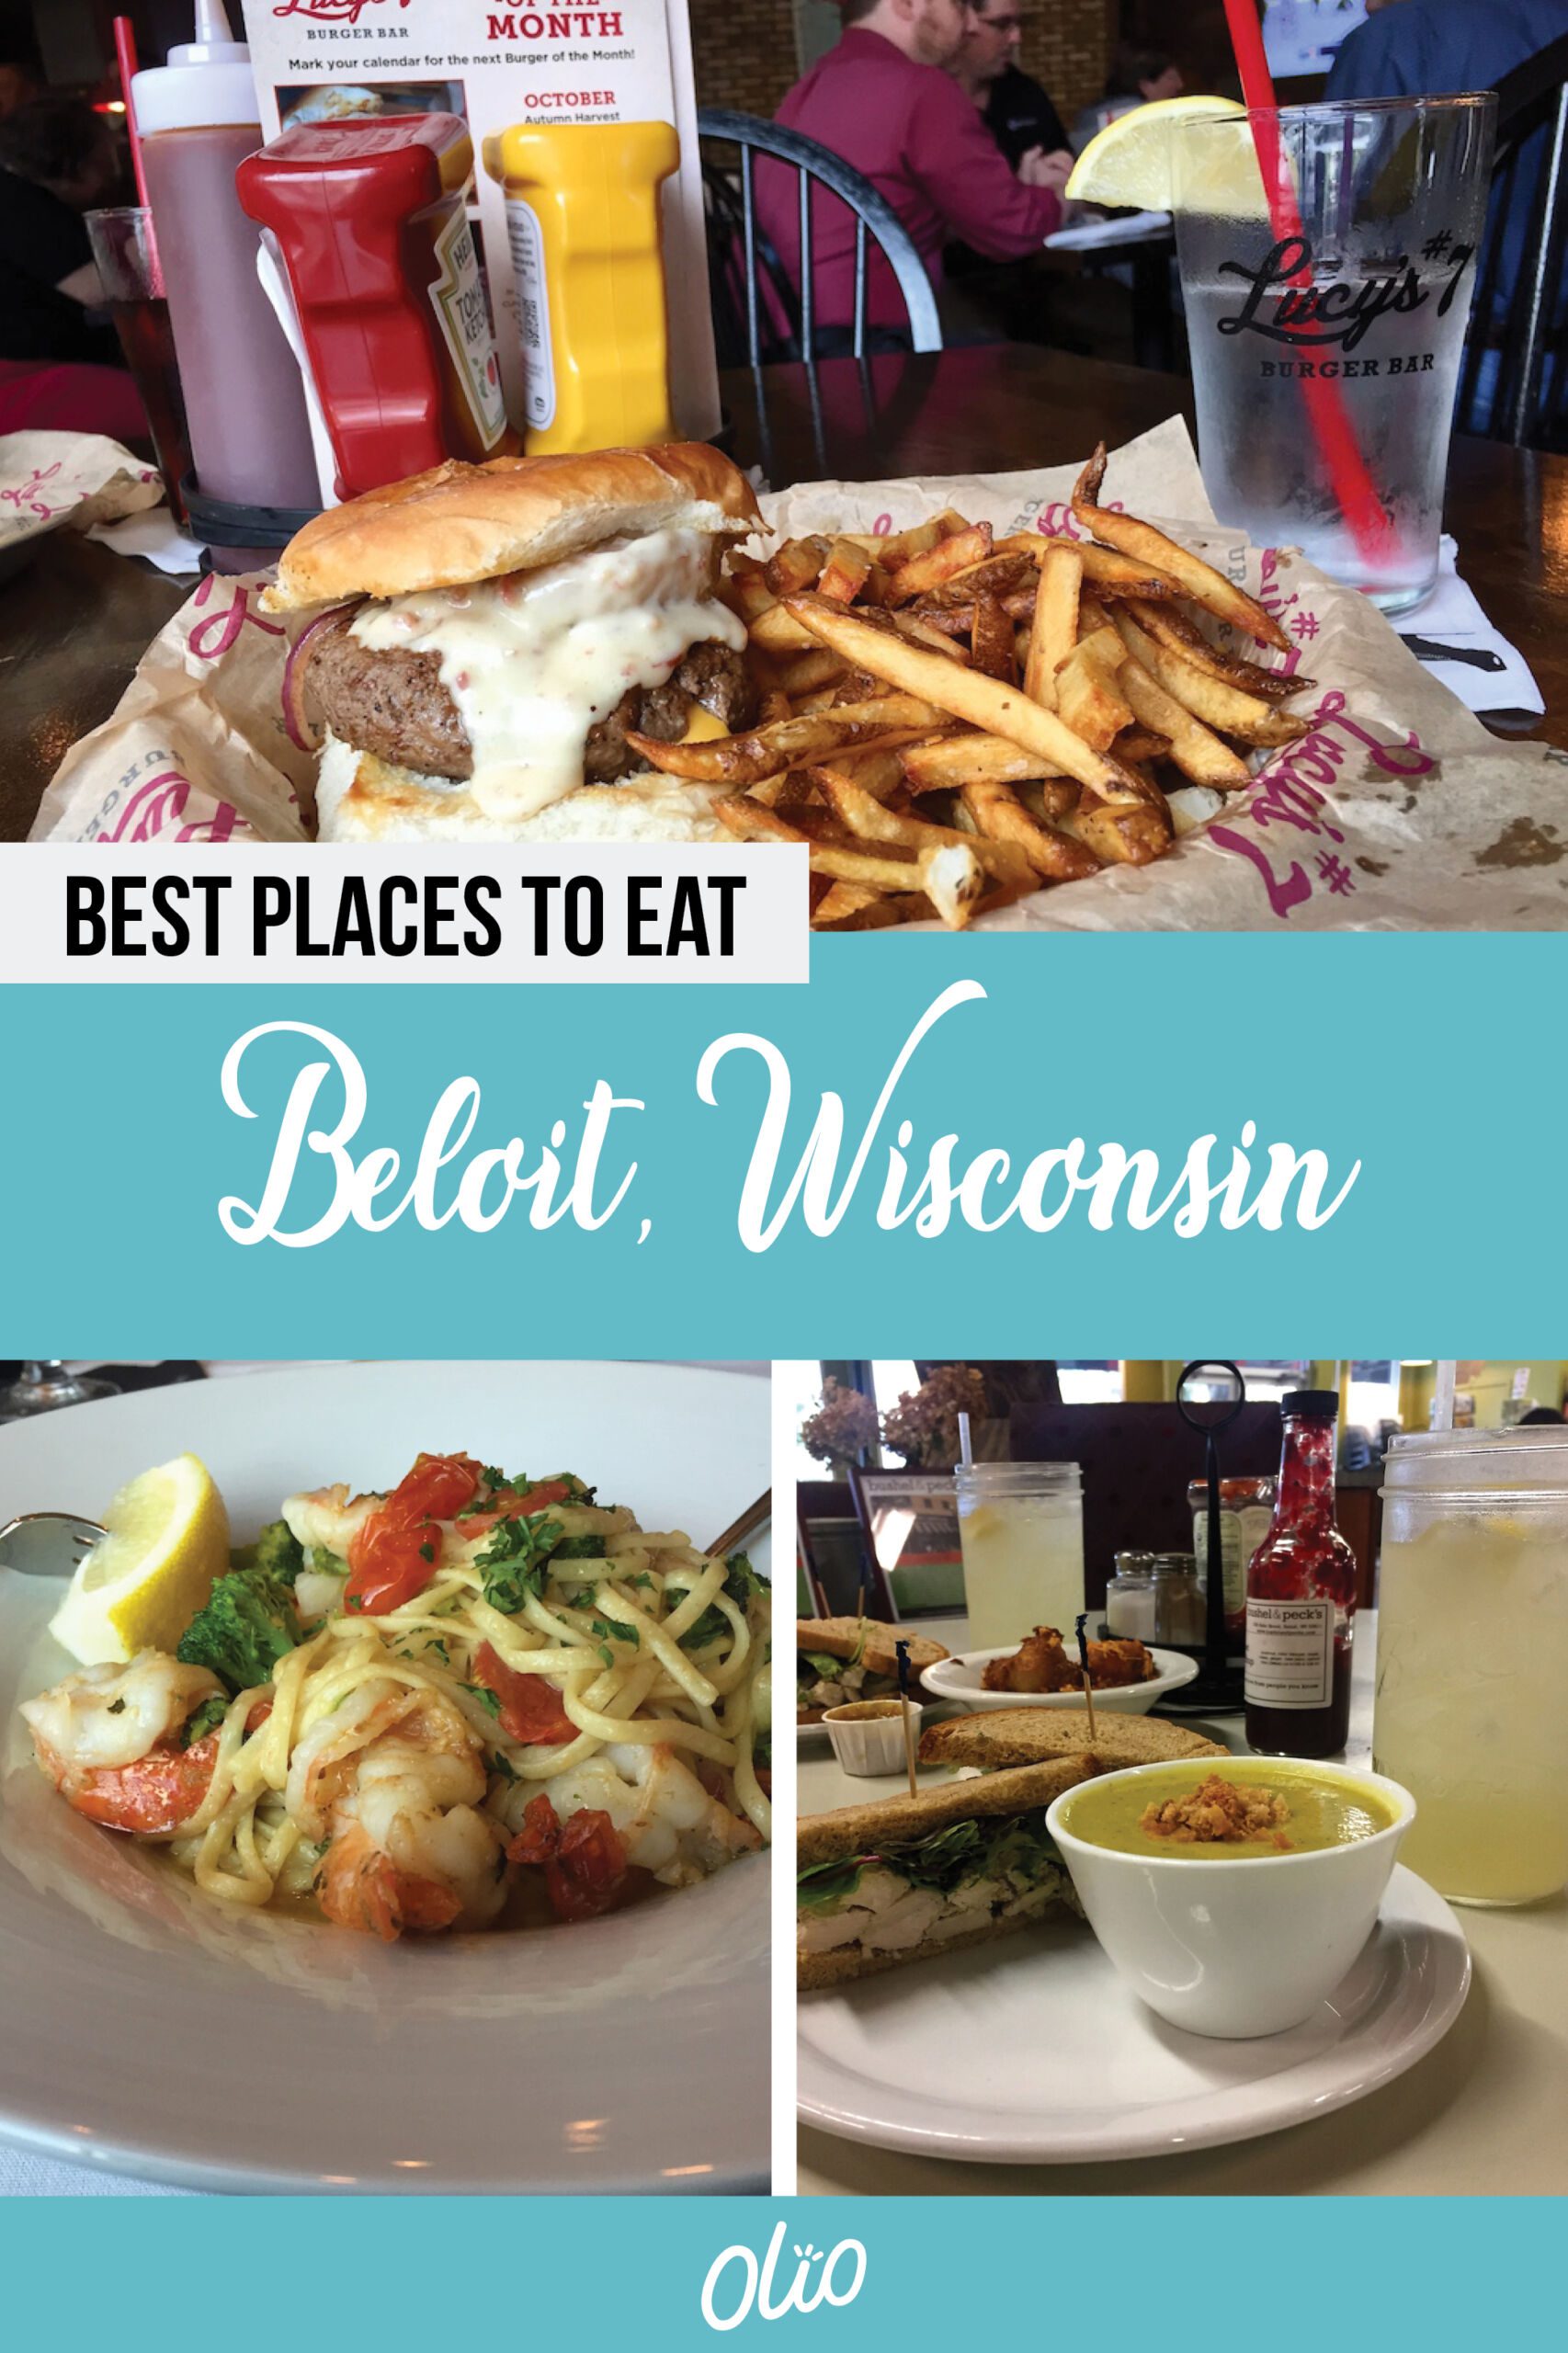 Need places to eat in Beloit, Wisconsin? Look no further! These unique eateries serve Wisconsin favorites like cheese curds and prime rib alongside innovative and inspiring cuisine. #Wisconsin